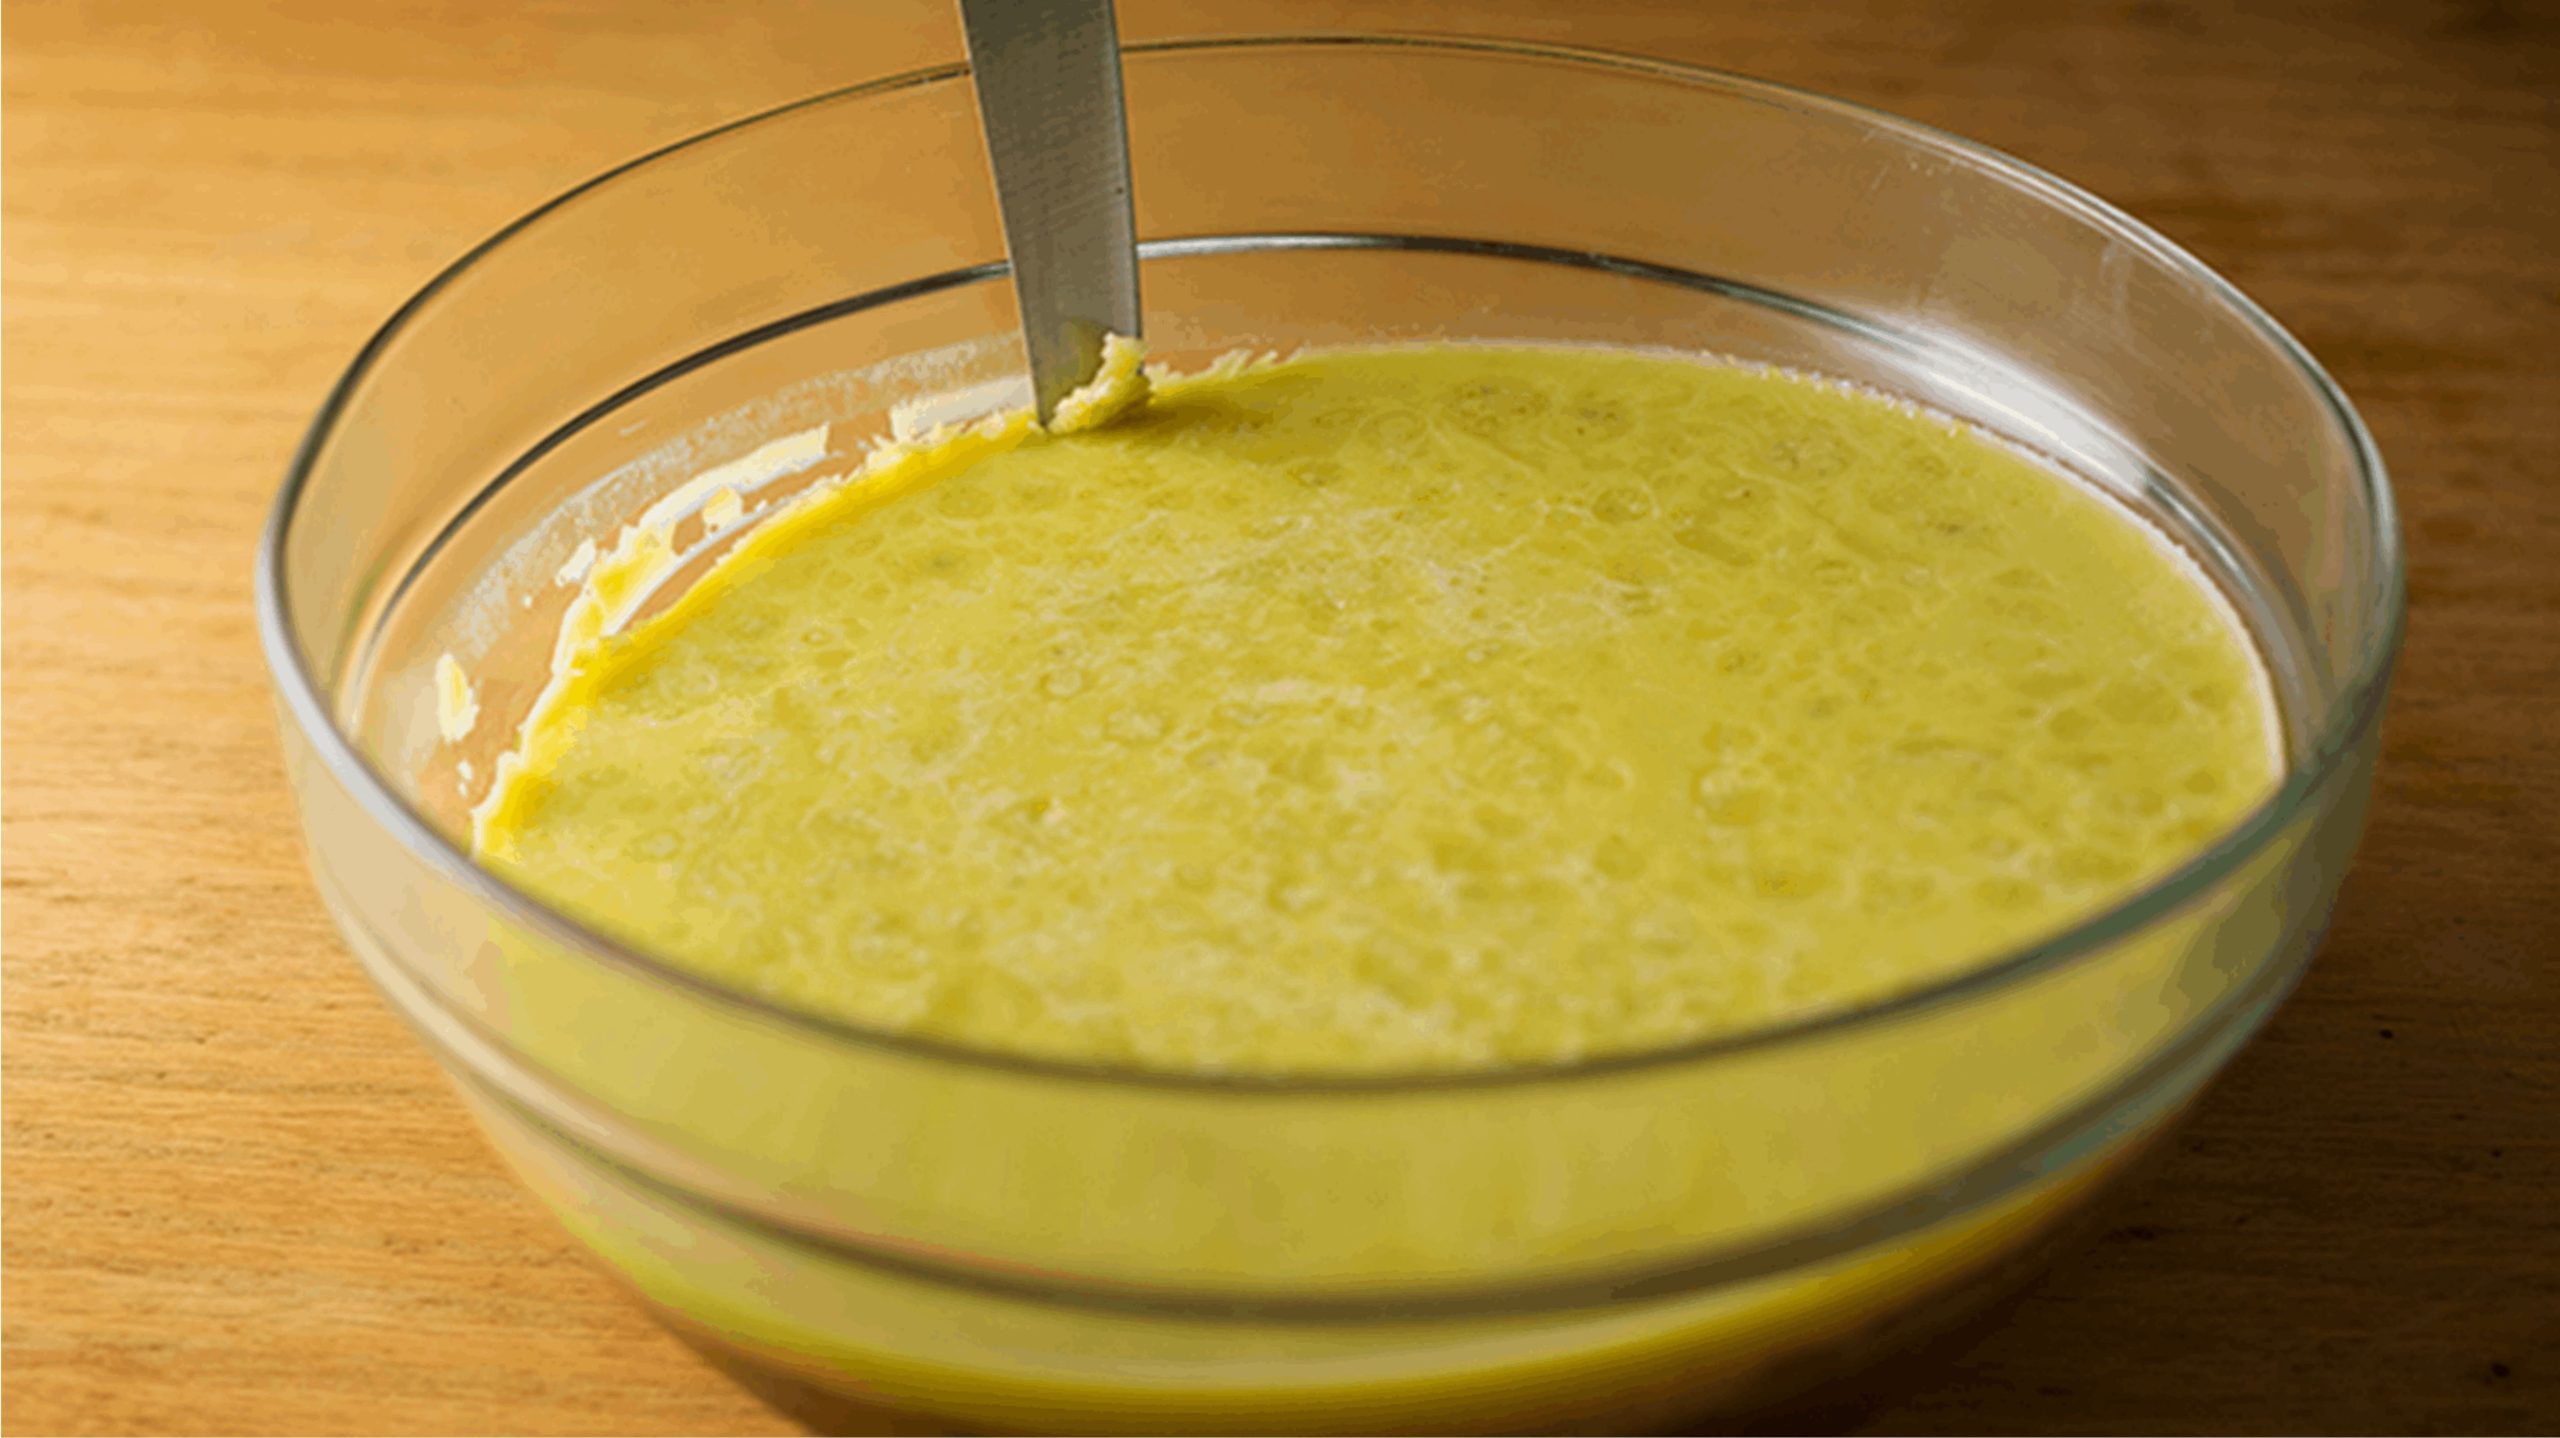 But if you'd rather not learn how to make cannabutter at home, you can always buy some from your favourite online weed dispensary like Chronic Farms. 